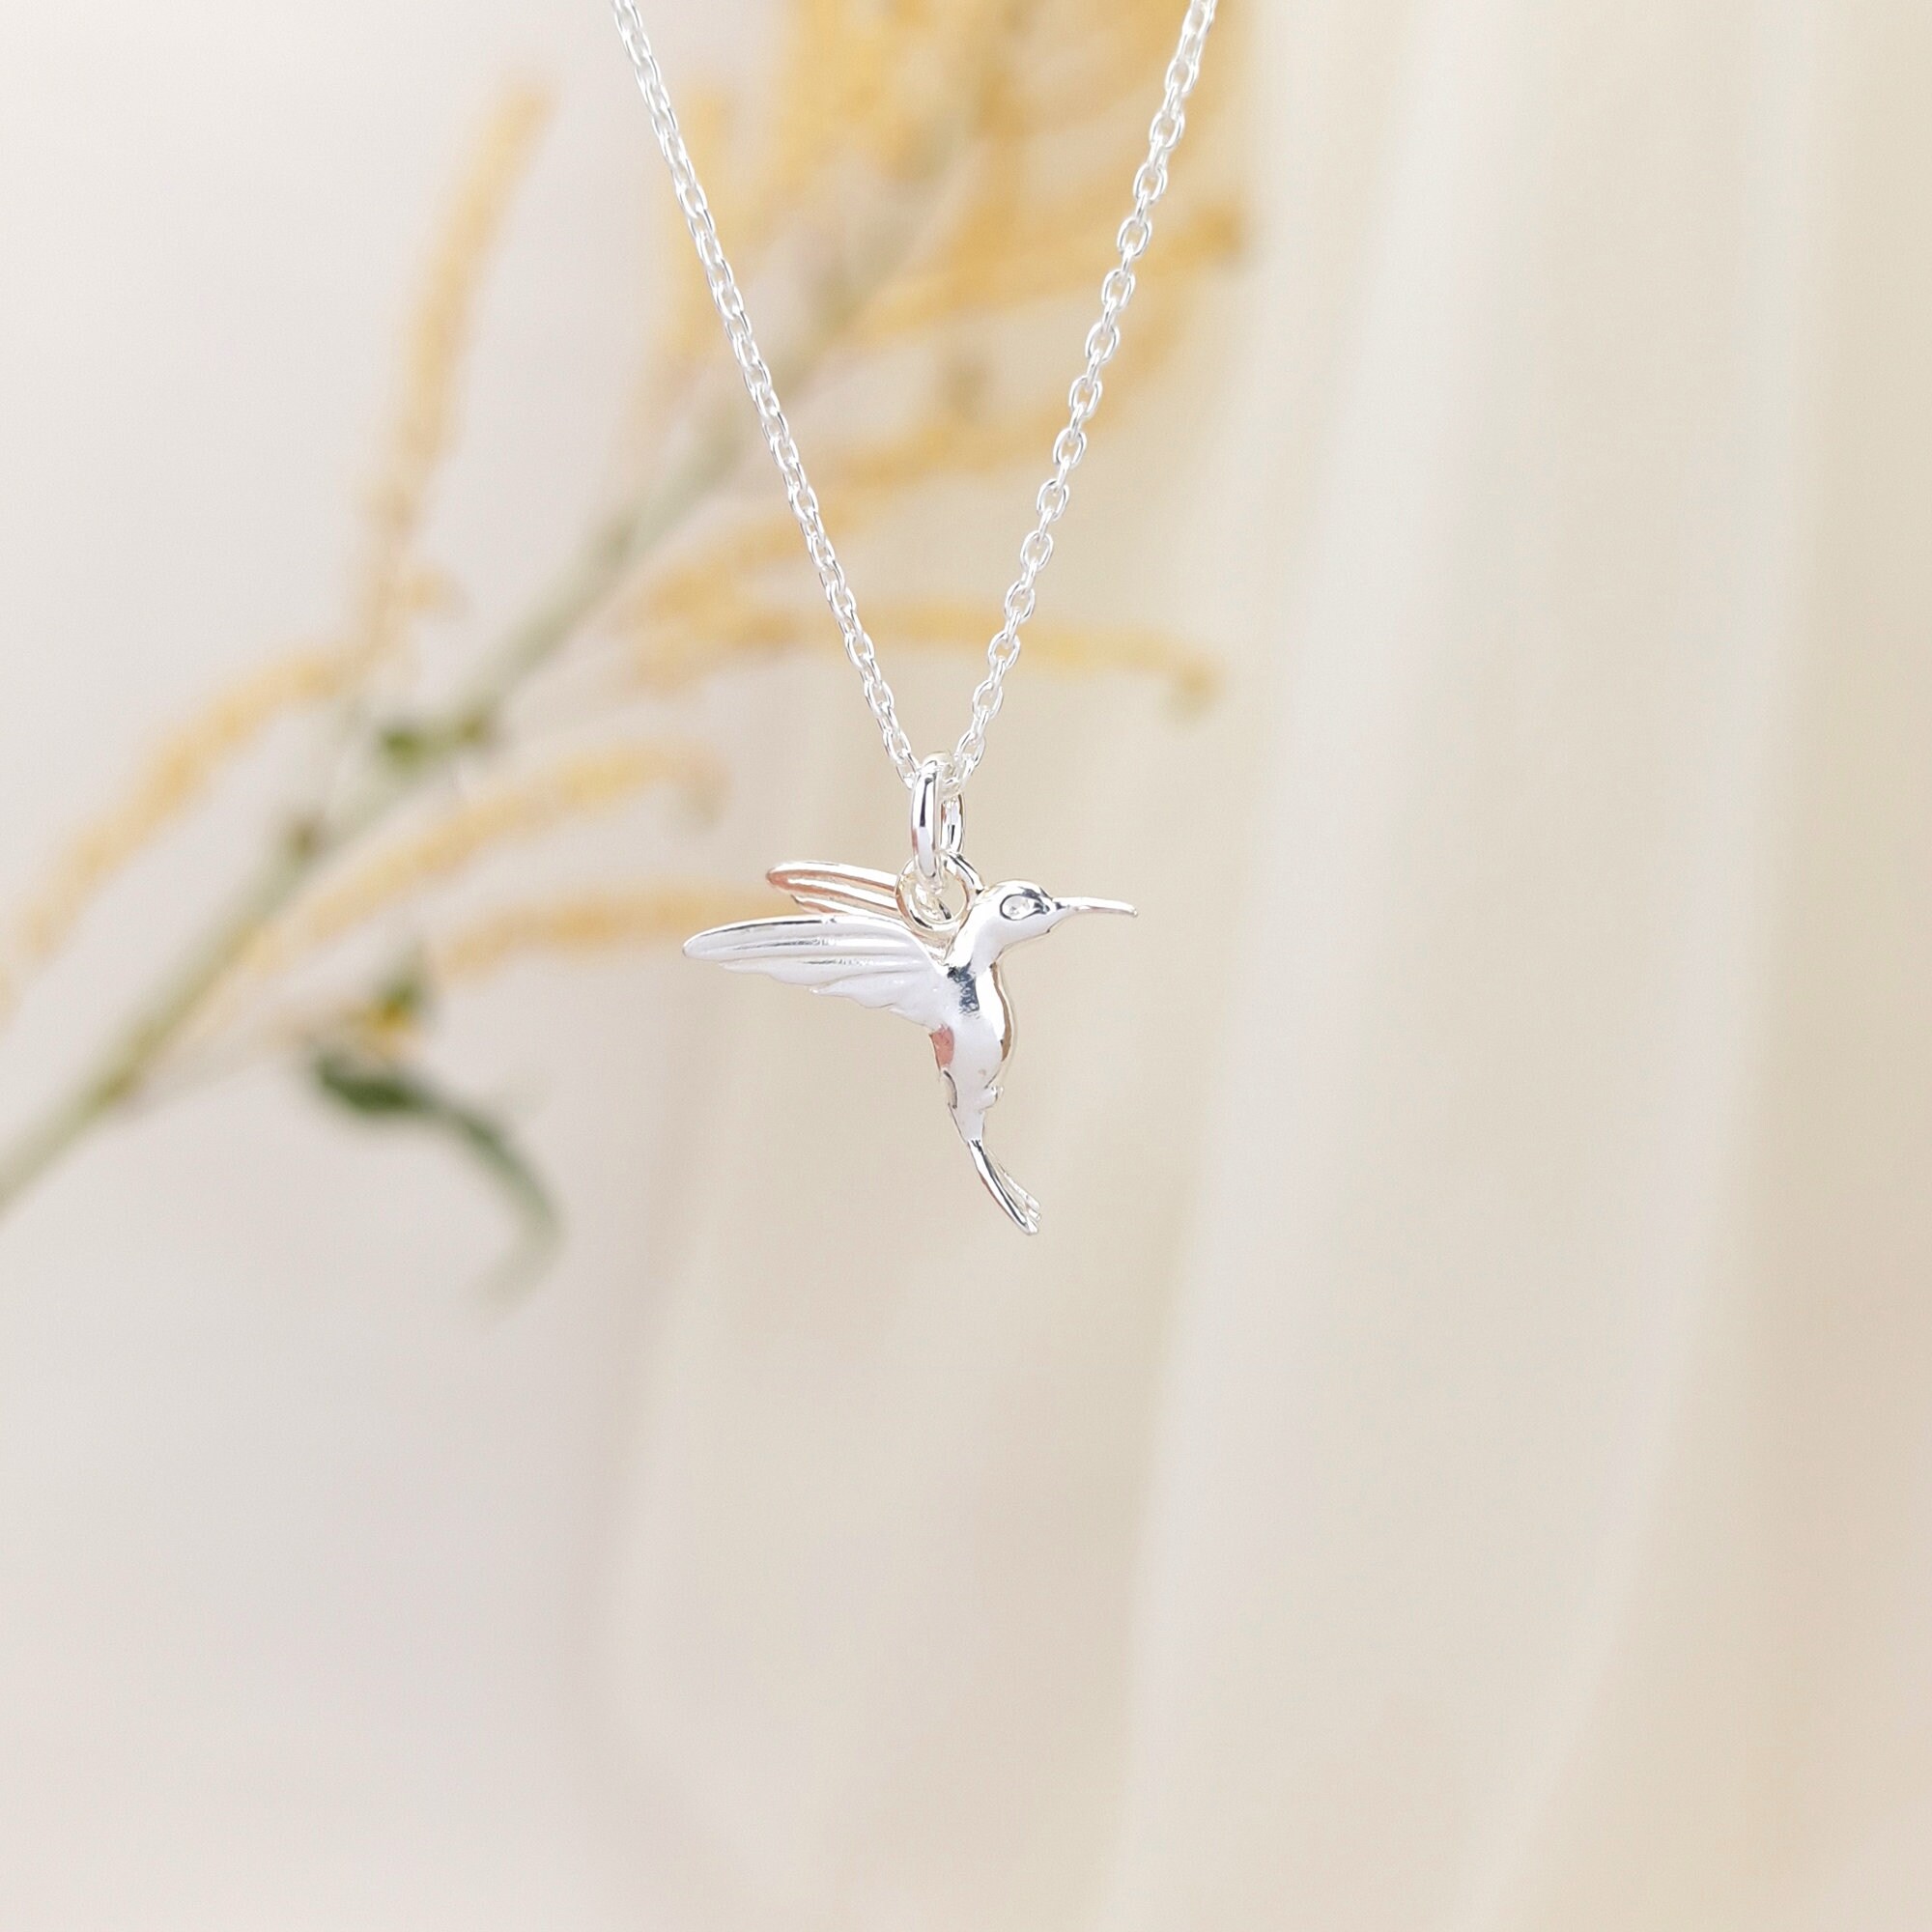 Sterling Silver Hummingbird Necklace Necklaces for Women - Etsy